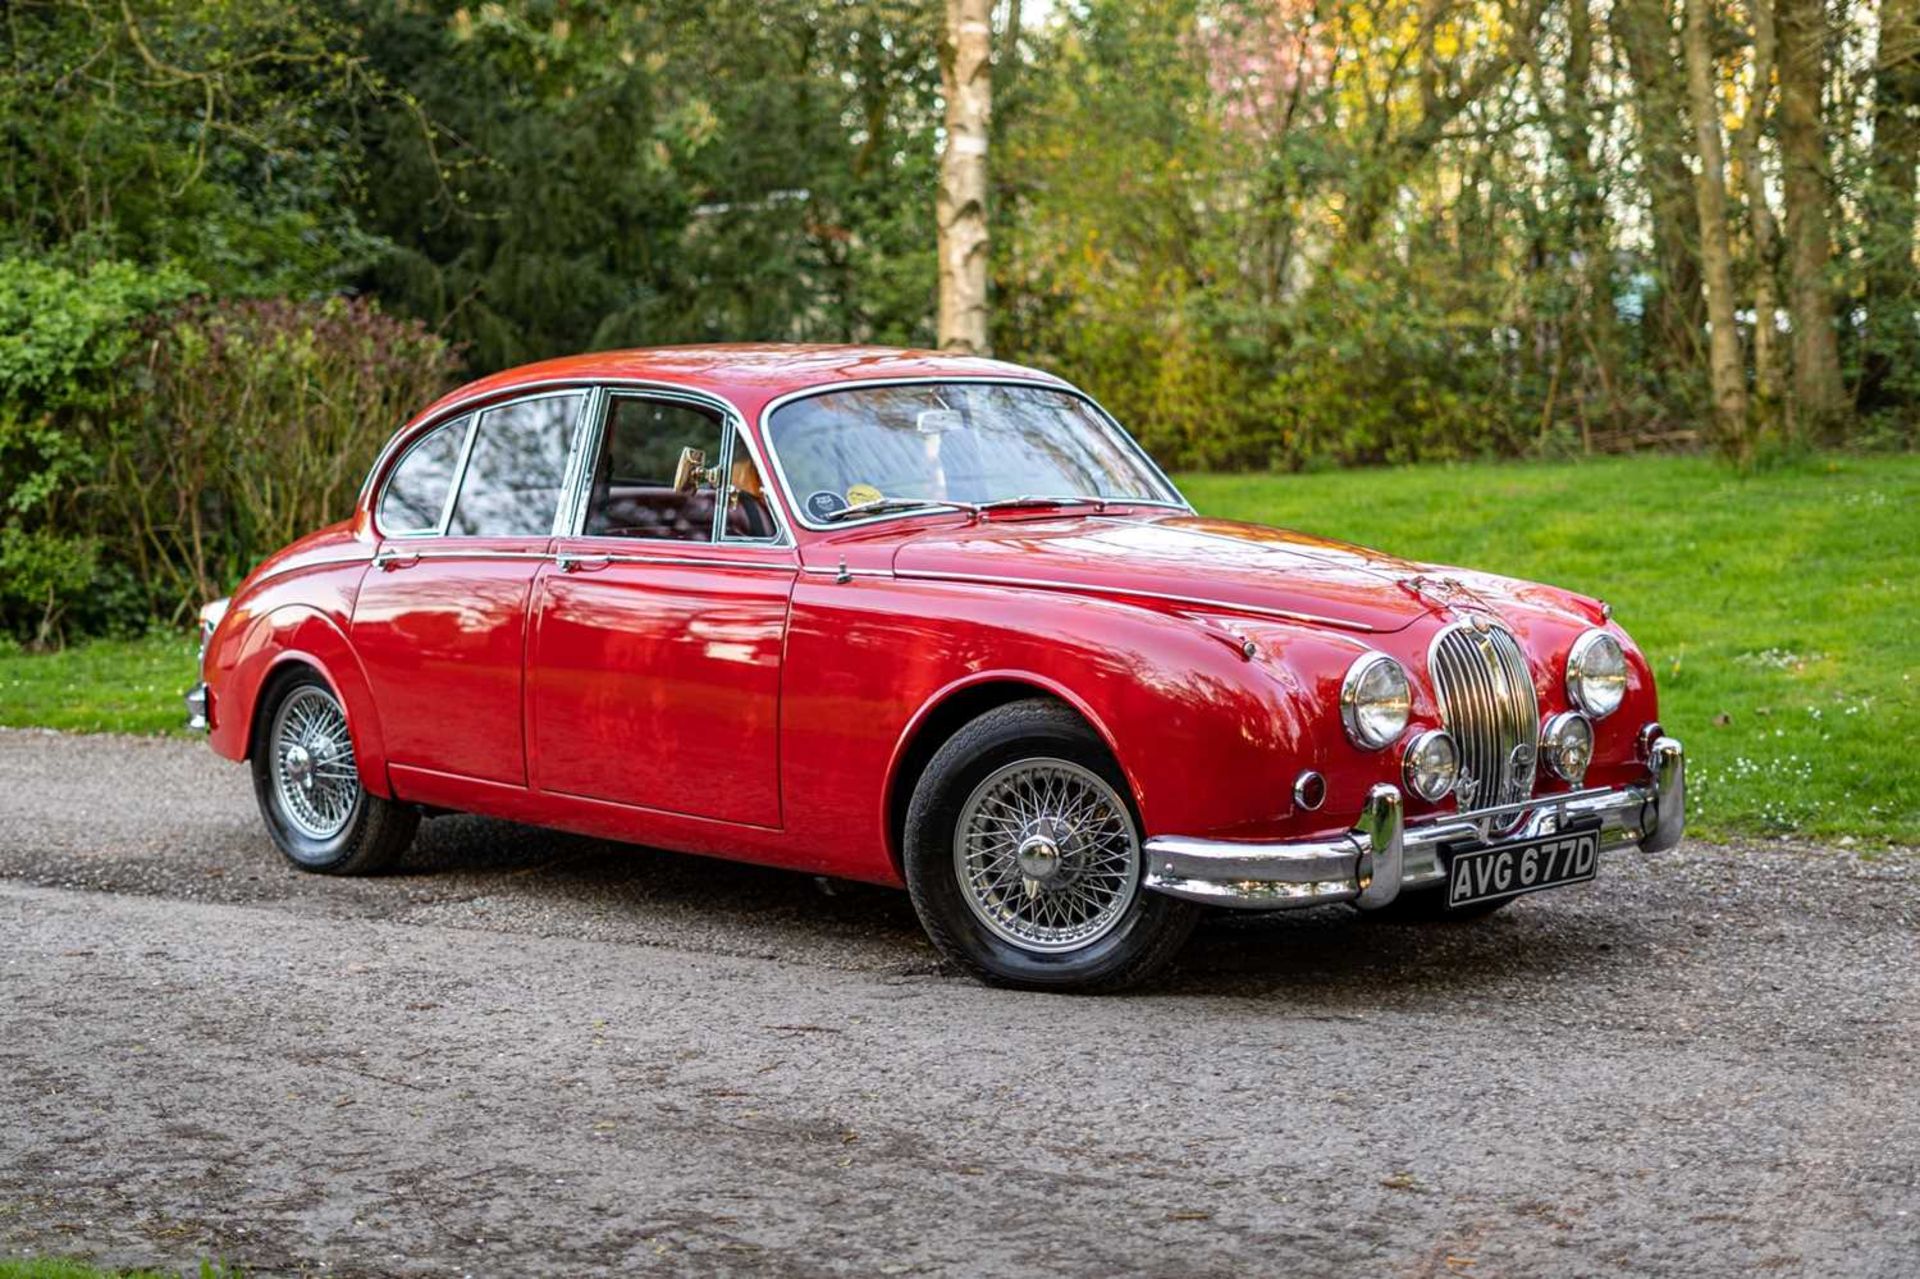 1966 Jaguar MKII 2.4 Believed to have covered a credible 19,000 miles, one former keeper 